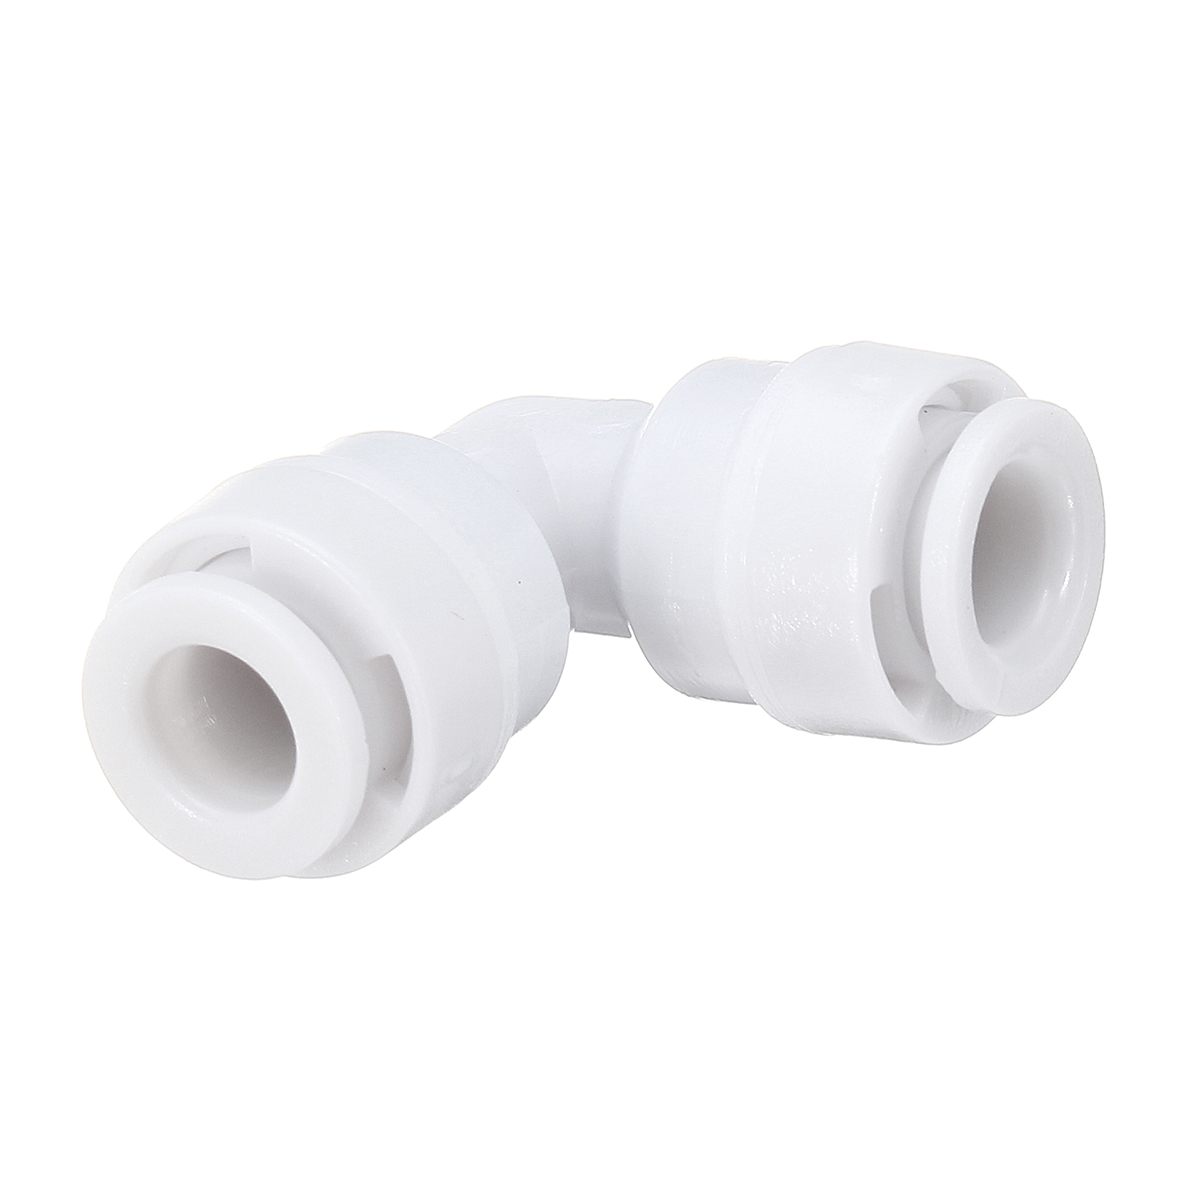 14-Inch-RO-Grade-L-Type-Water-Tube-Quick-Connect-Parts-Fittings-Connection-Pipes-for-Water-Filters-1378011